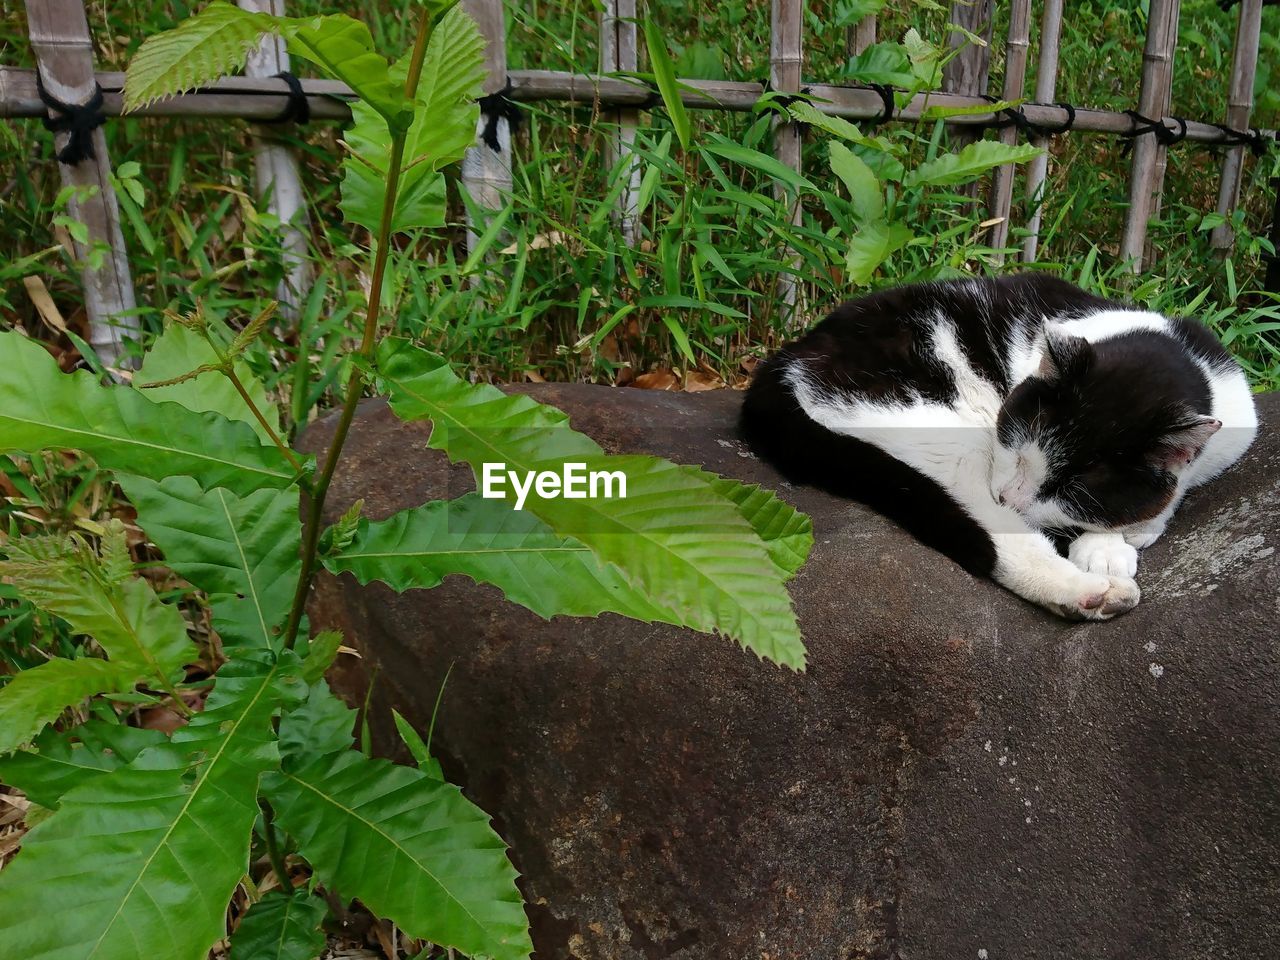 VIEW OF A CAT RESTING ON PLANT